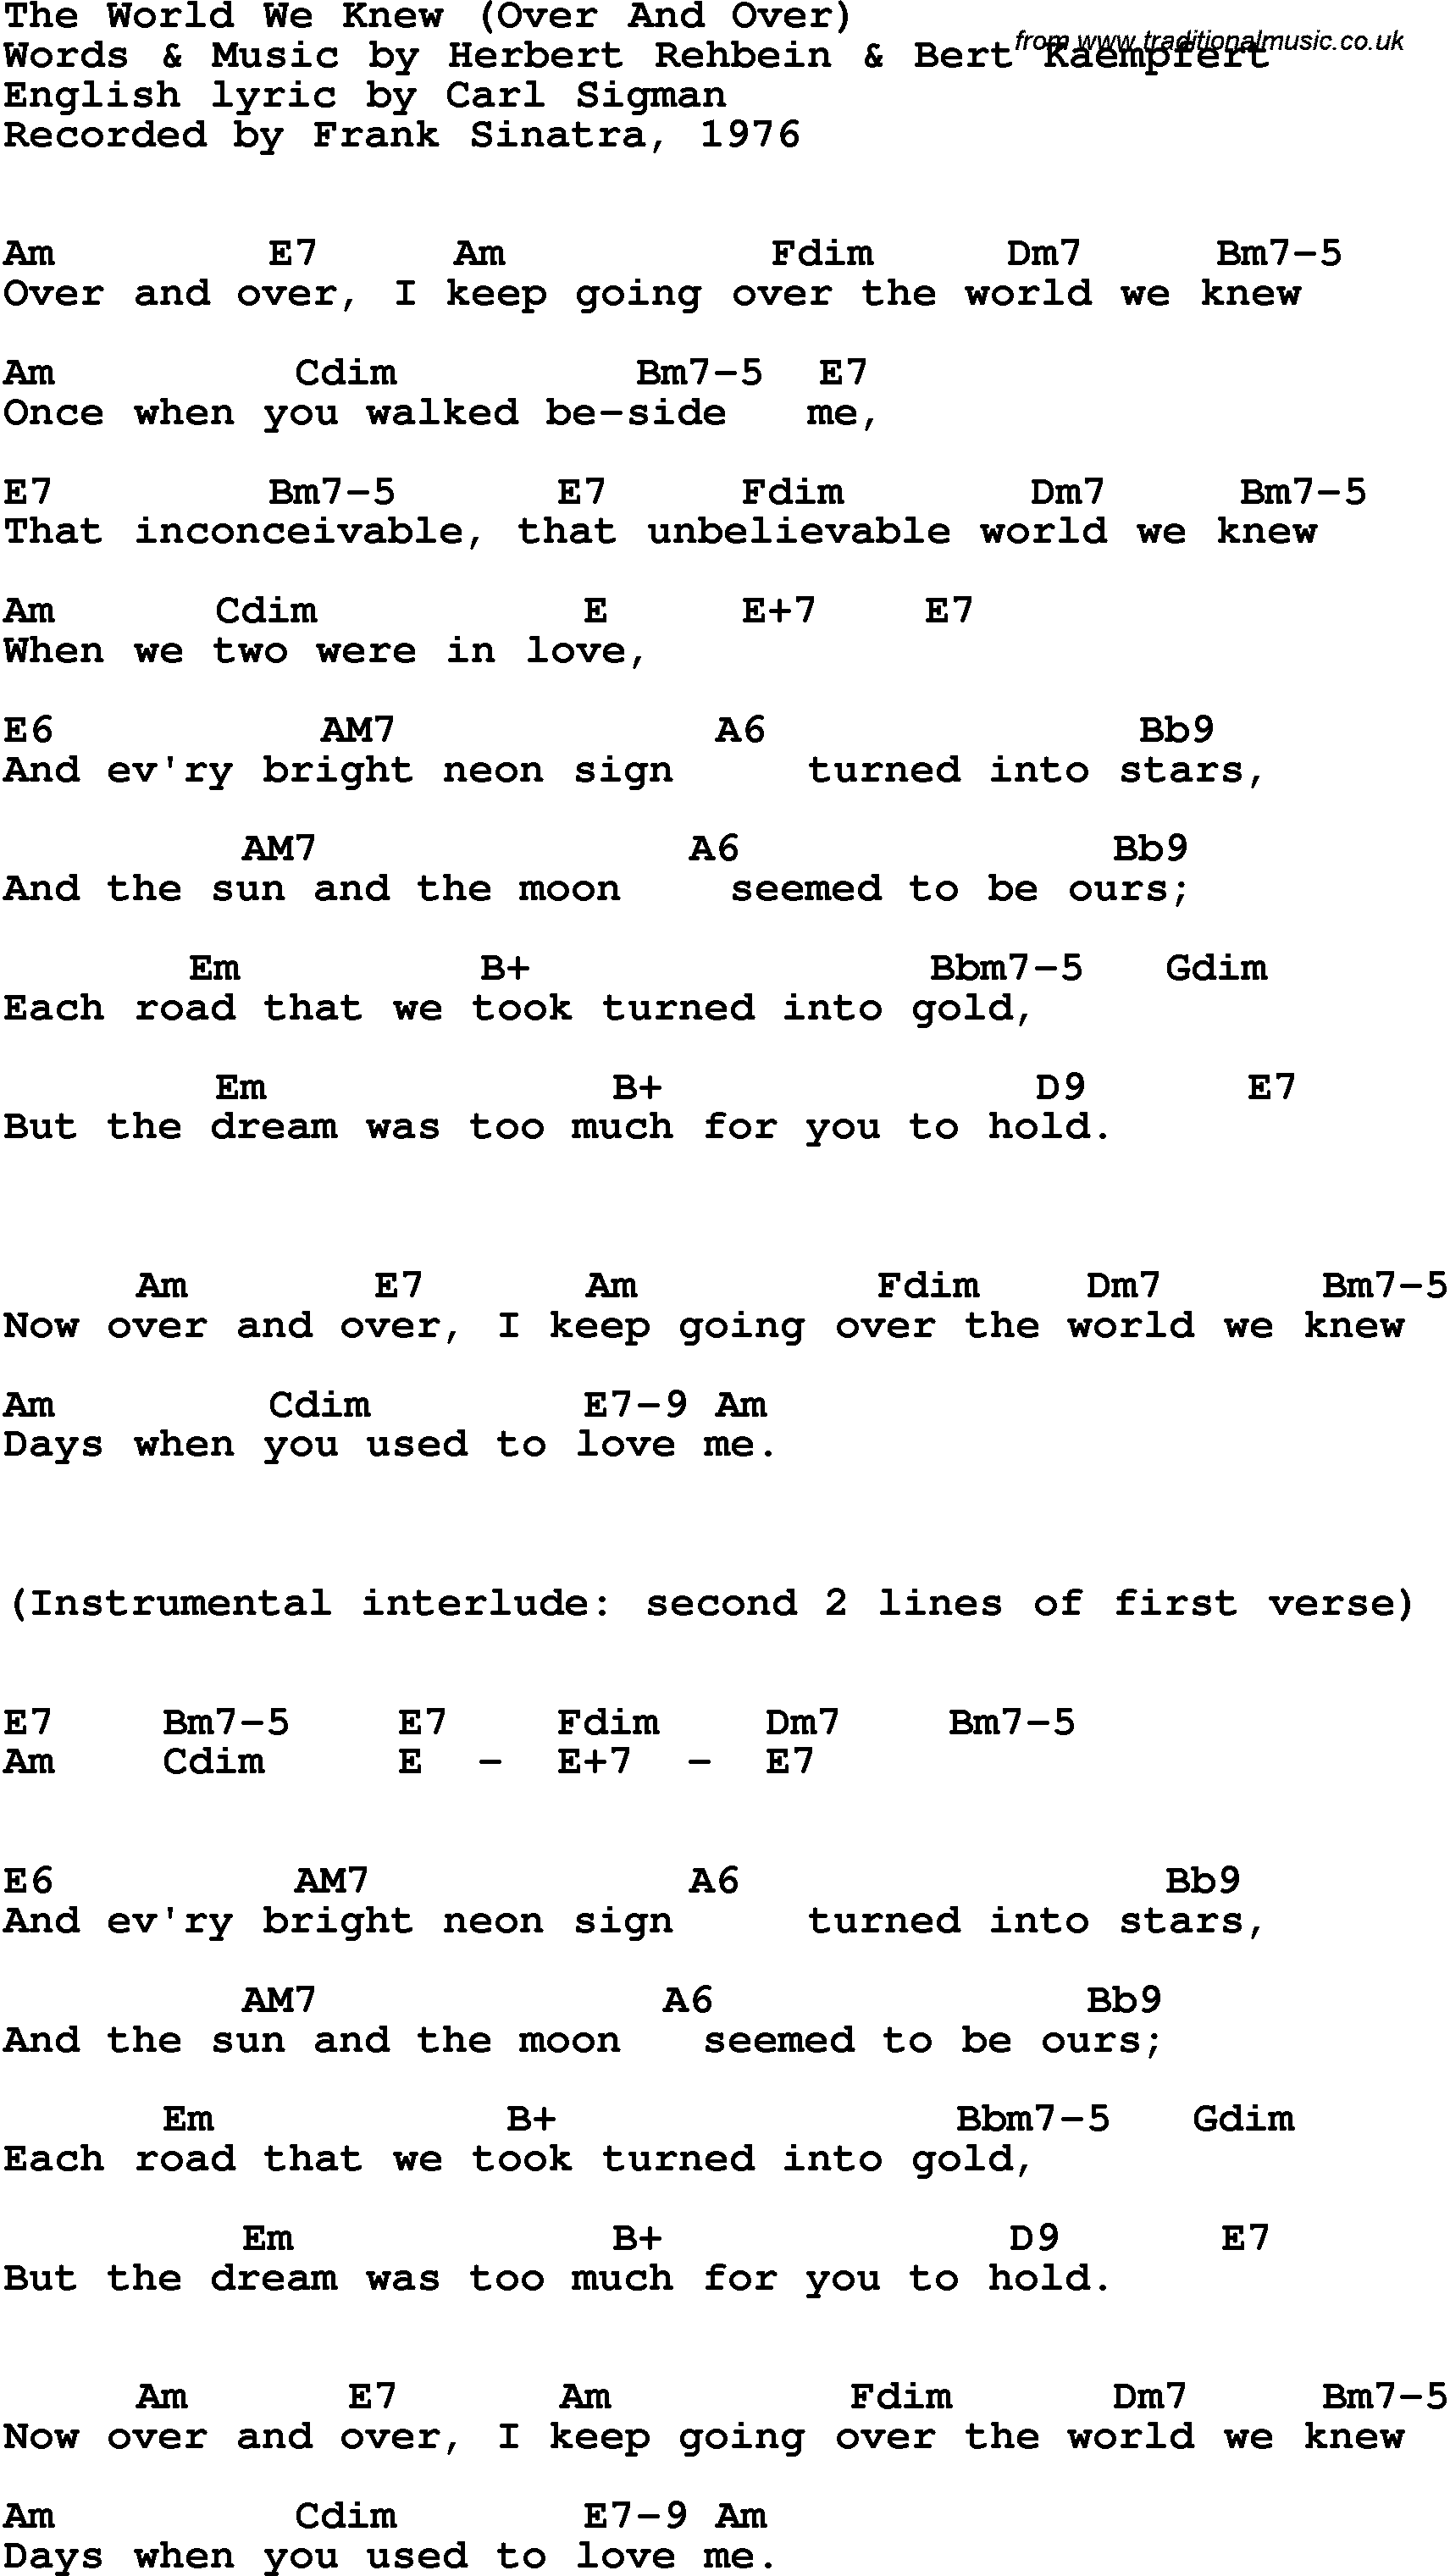 Song Lyrics with guitar chords for World We Knew, The (Over And Over) - Frank Sinatra, 1967